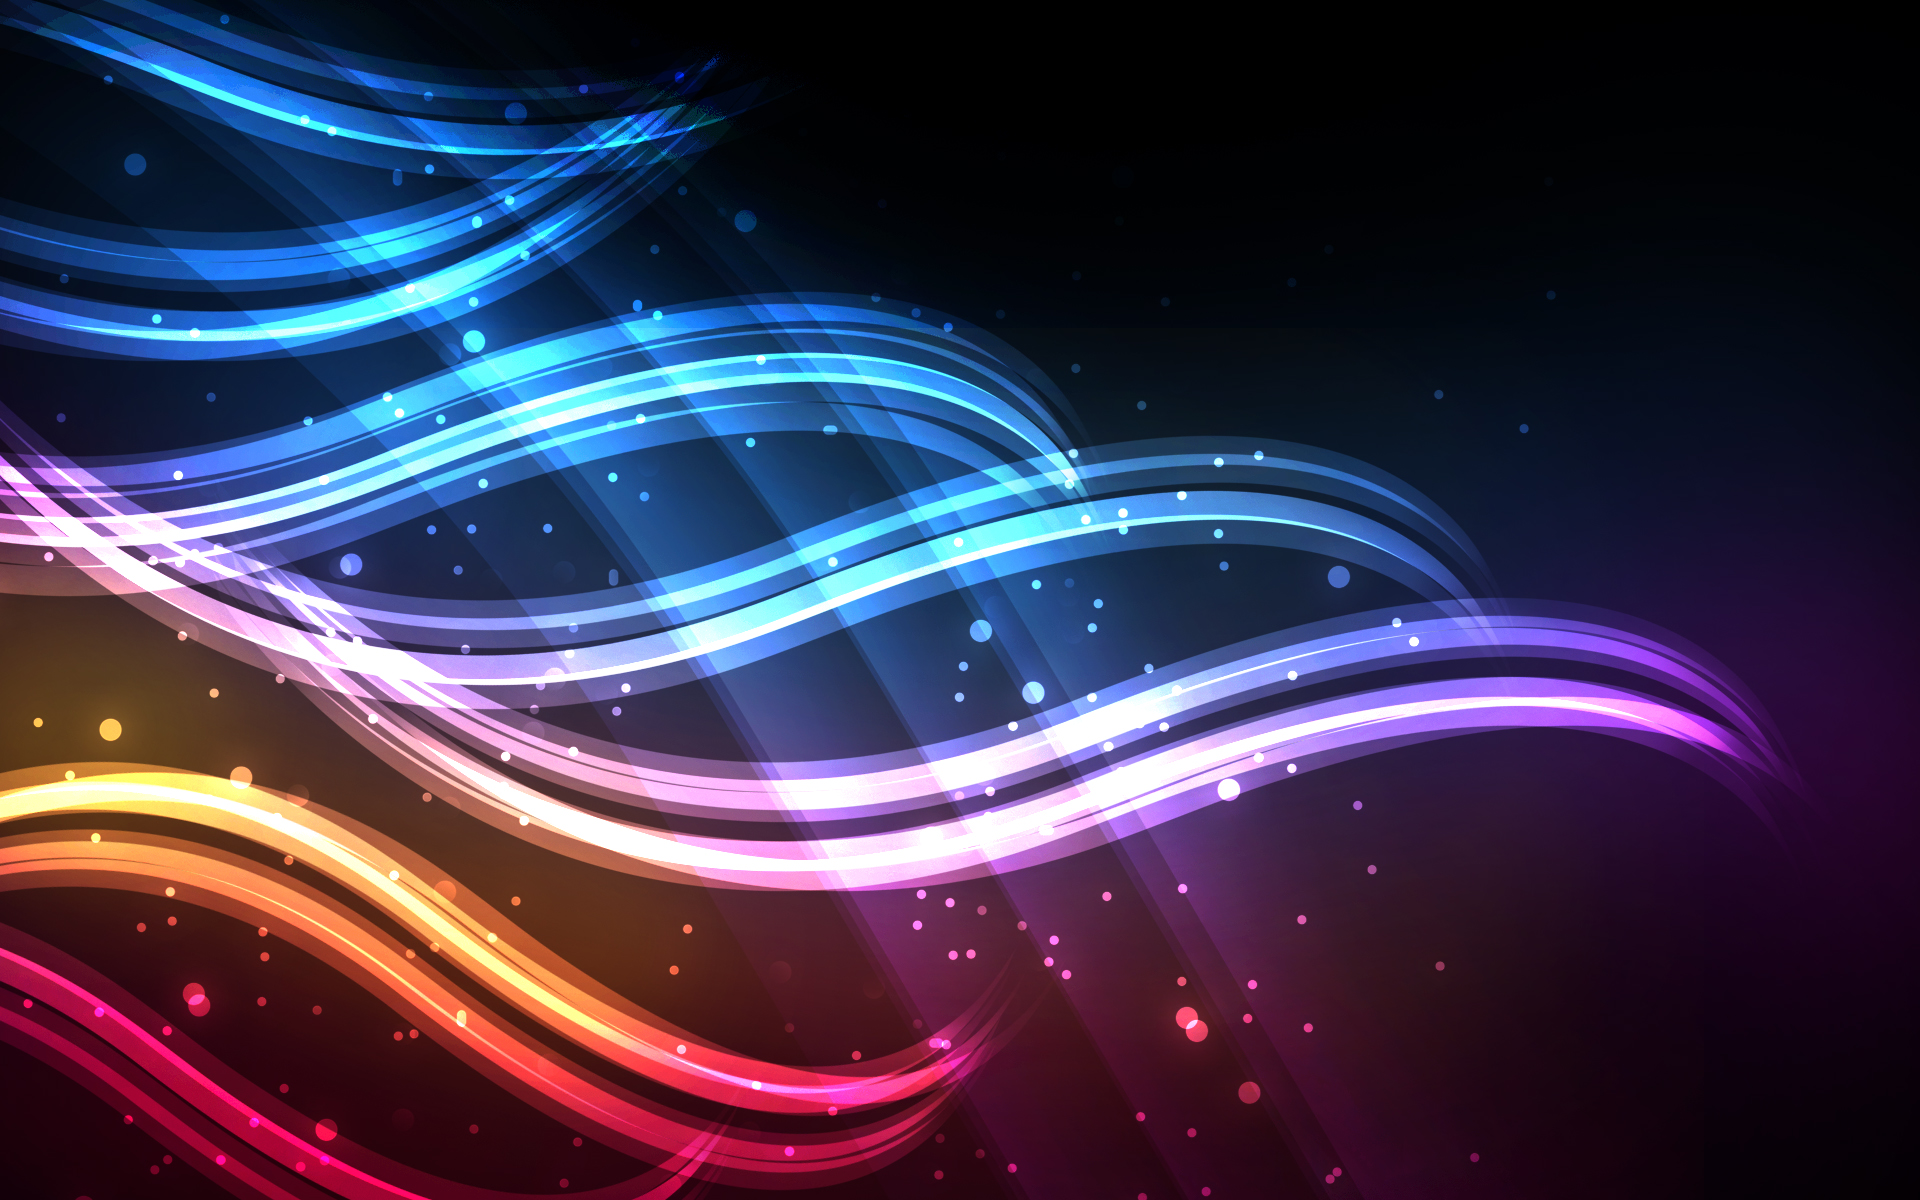 Waves Of Colors Artwork Wallpapers